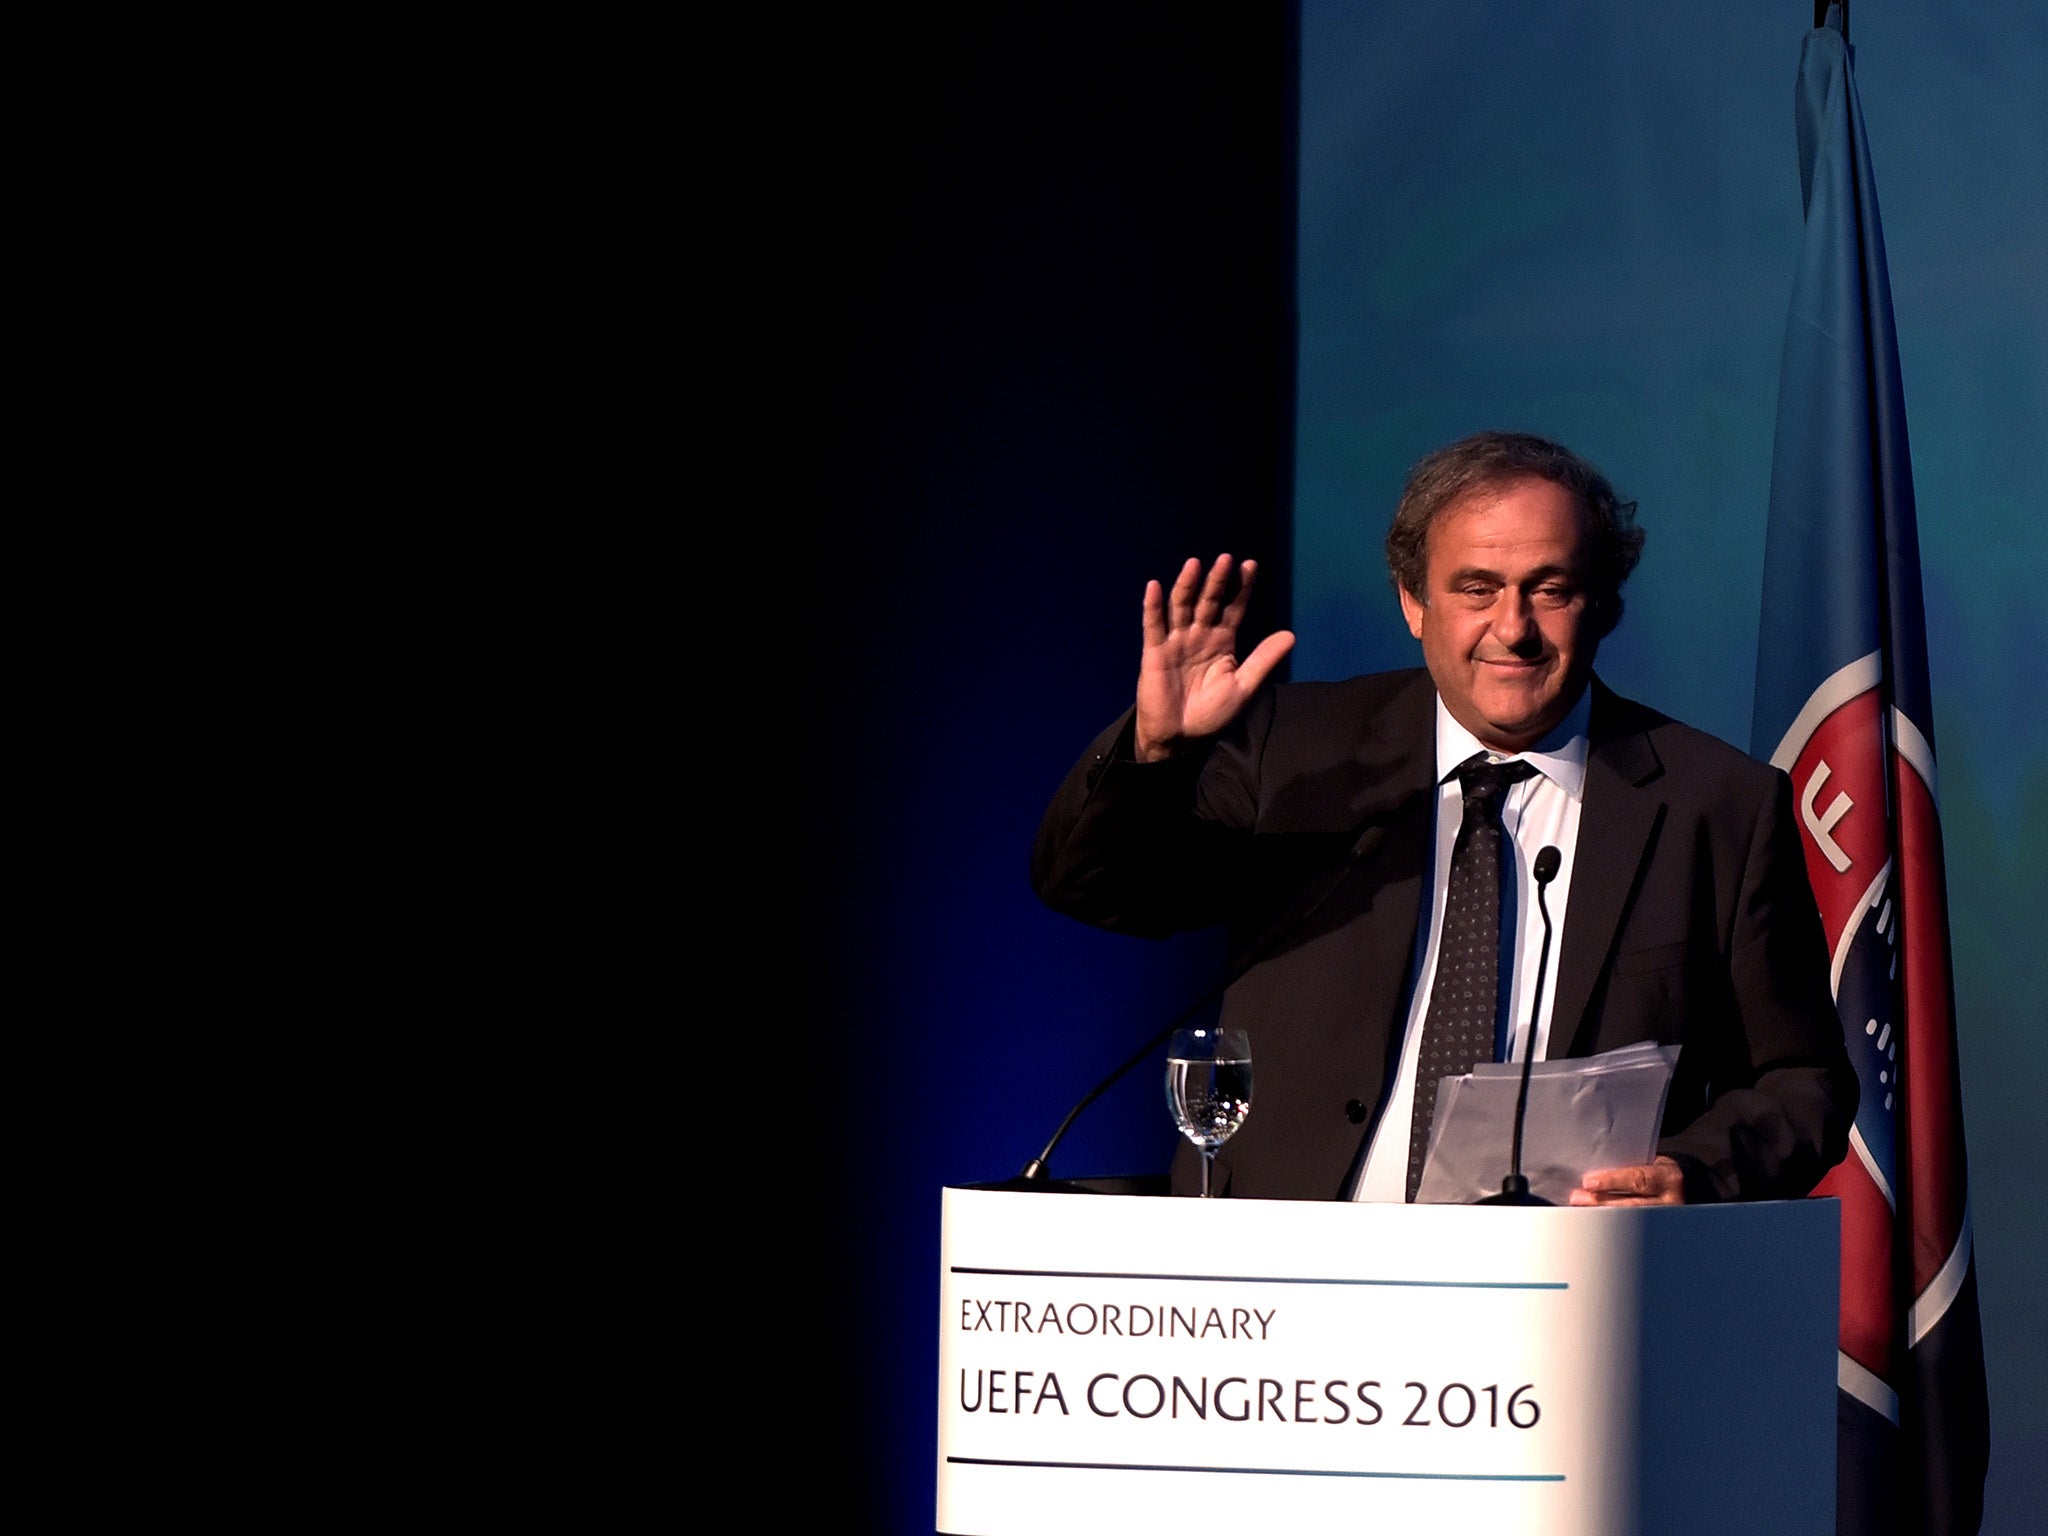 Michel Platini was allowed to speak at the conference